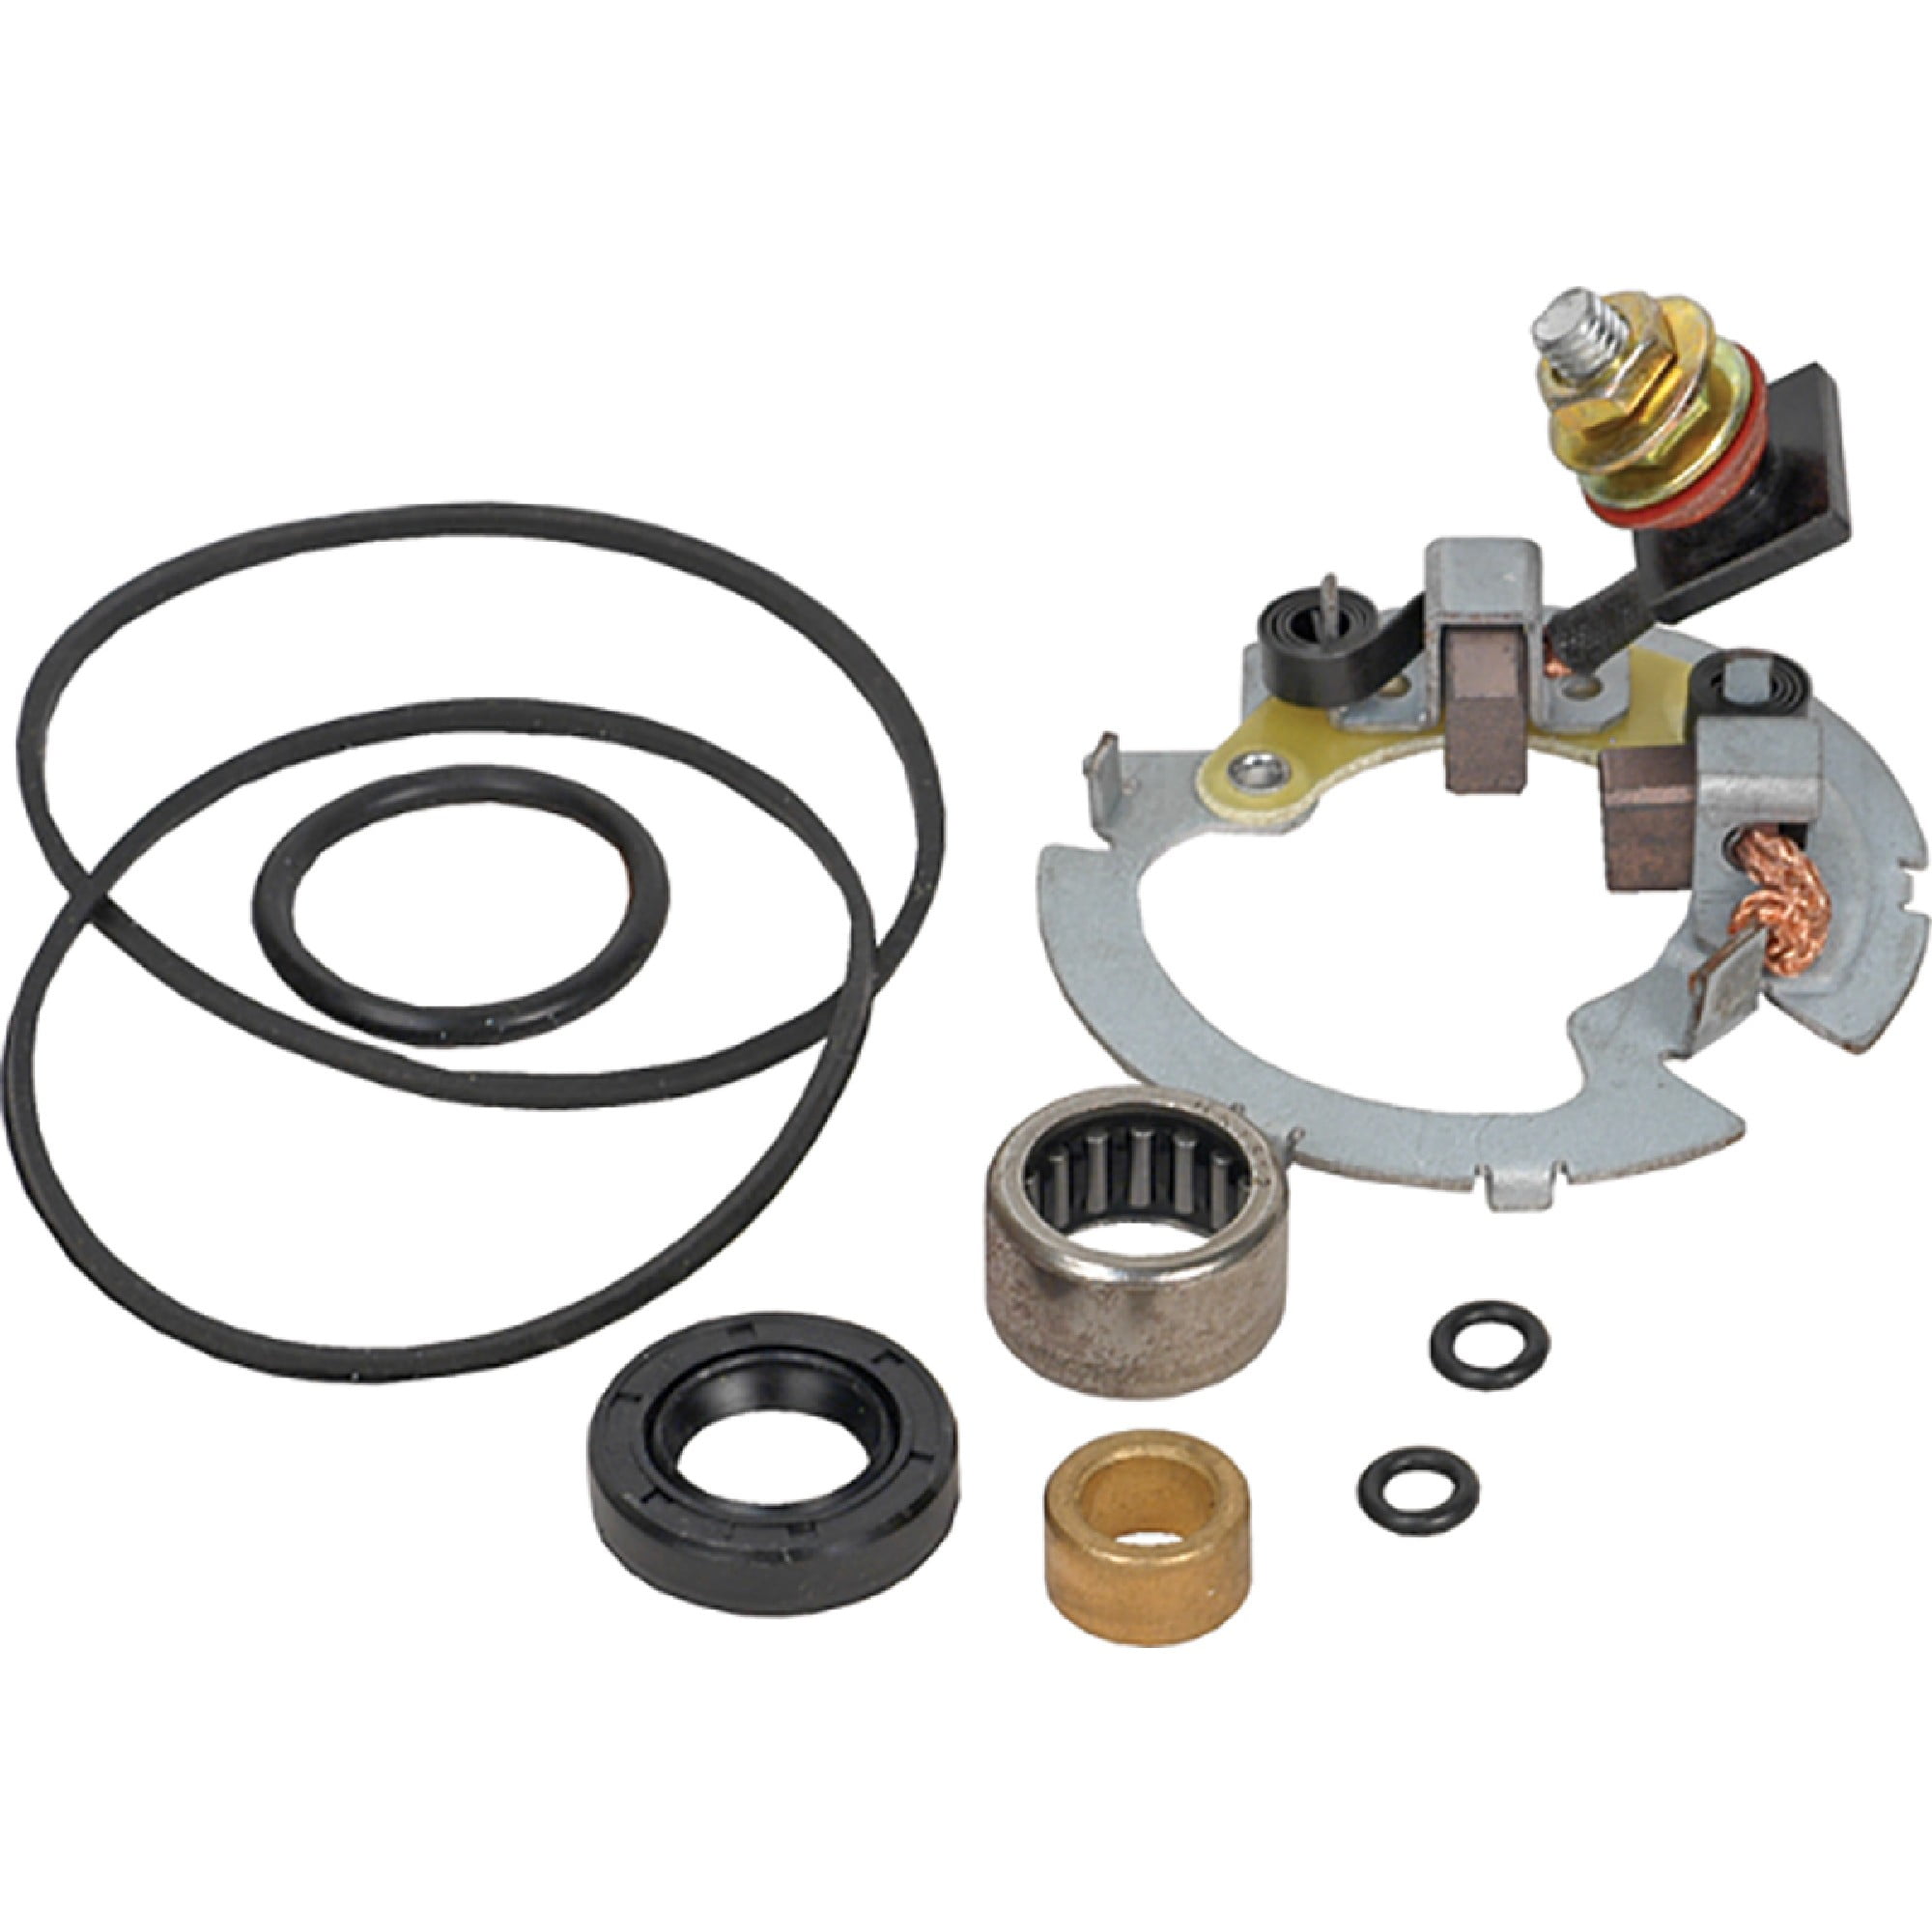 New DB Electrical 414-54011 Starter Repair Kit With Brush Holder Compatible with/Replacement for Polaris ATV 4-Stroke 325 330 335 400 450 500 HO EFI 